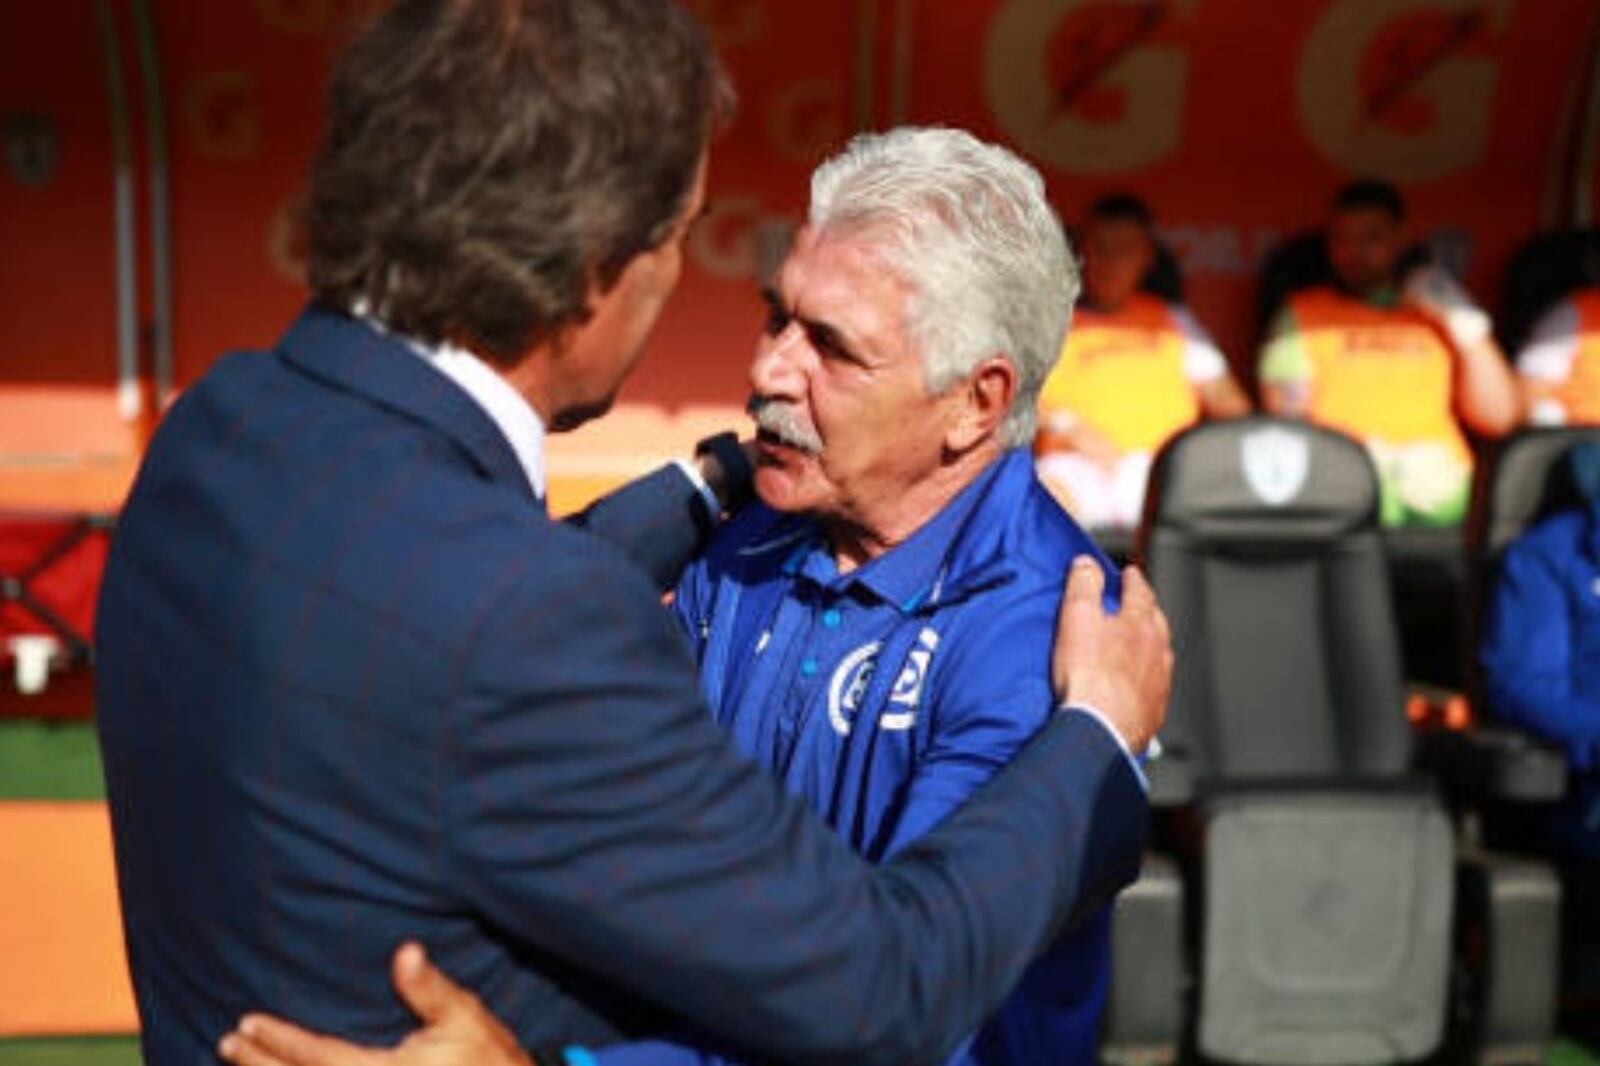 And that's how he wanted to be the Tri's coach, Ferretti's lesson for Almada with Cruz Azul